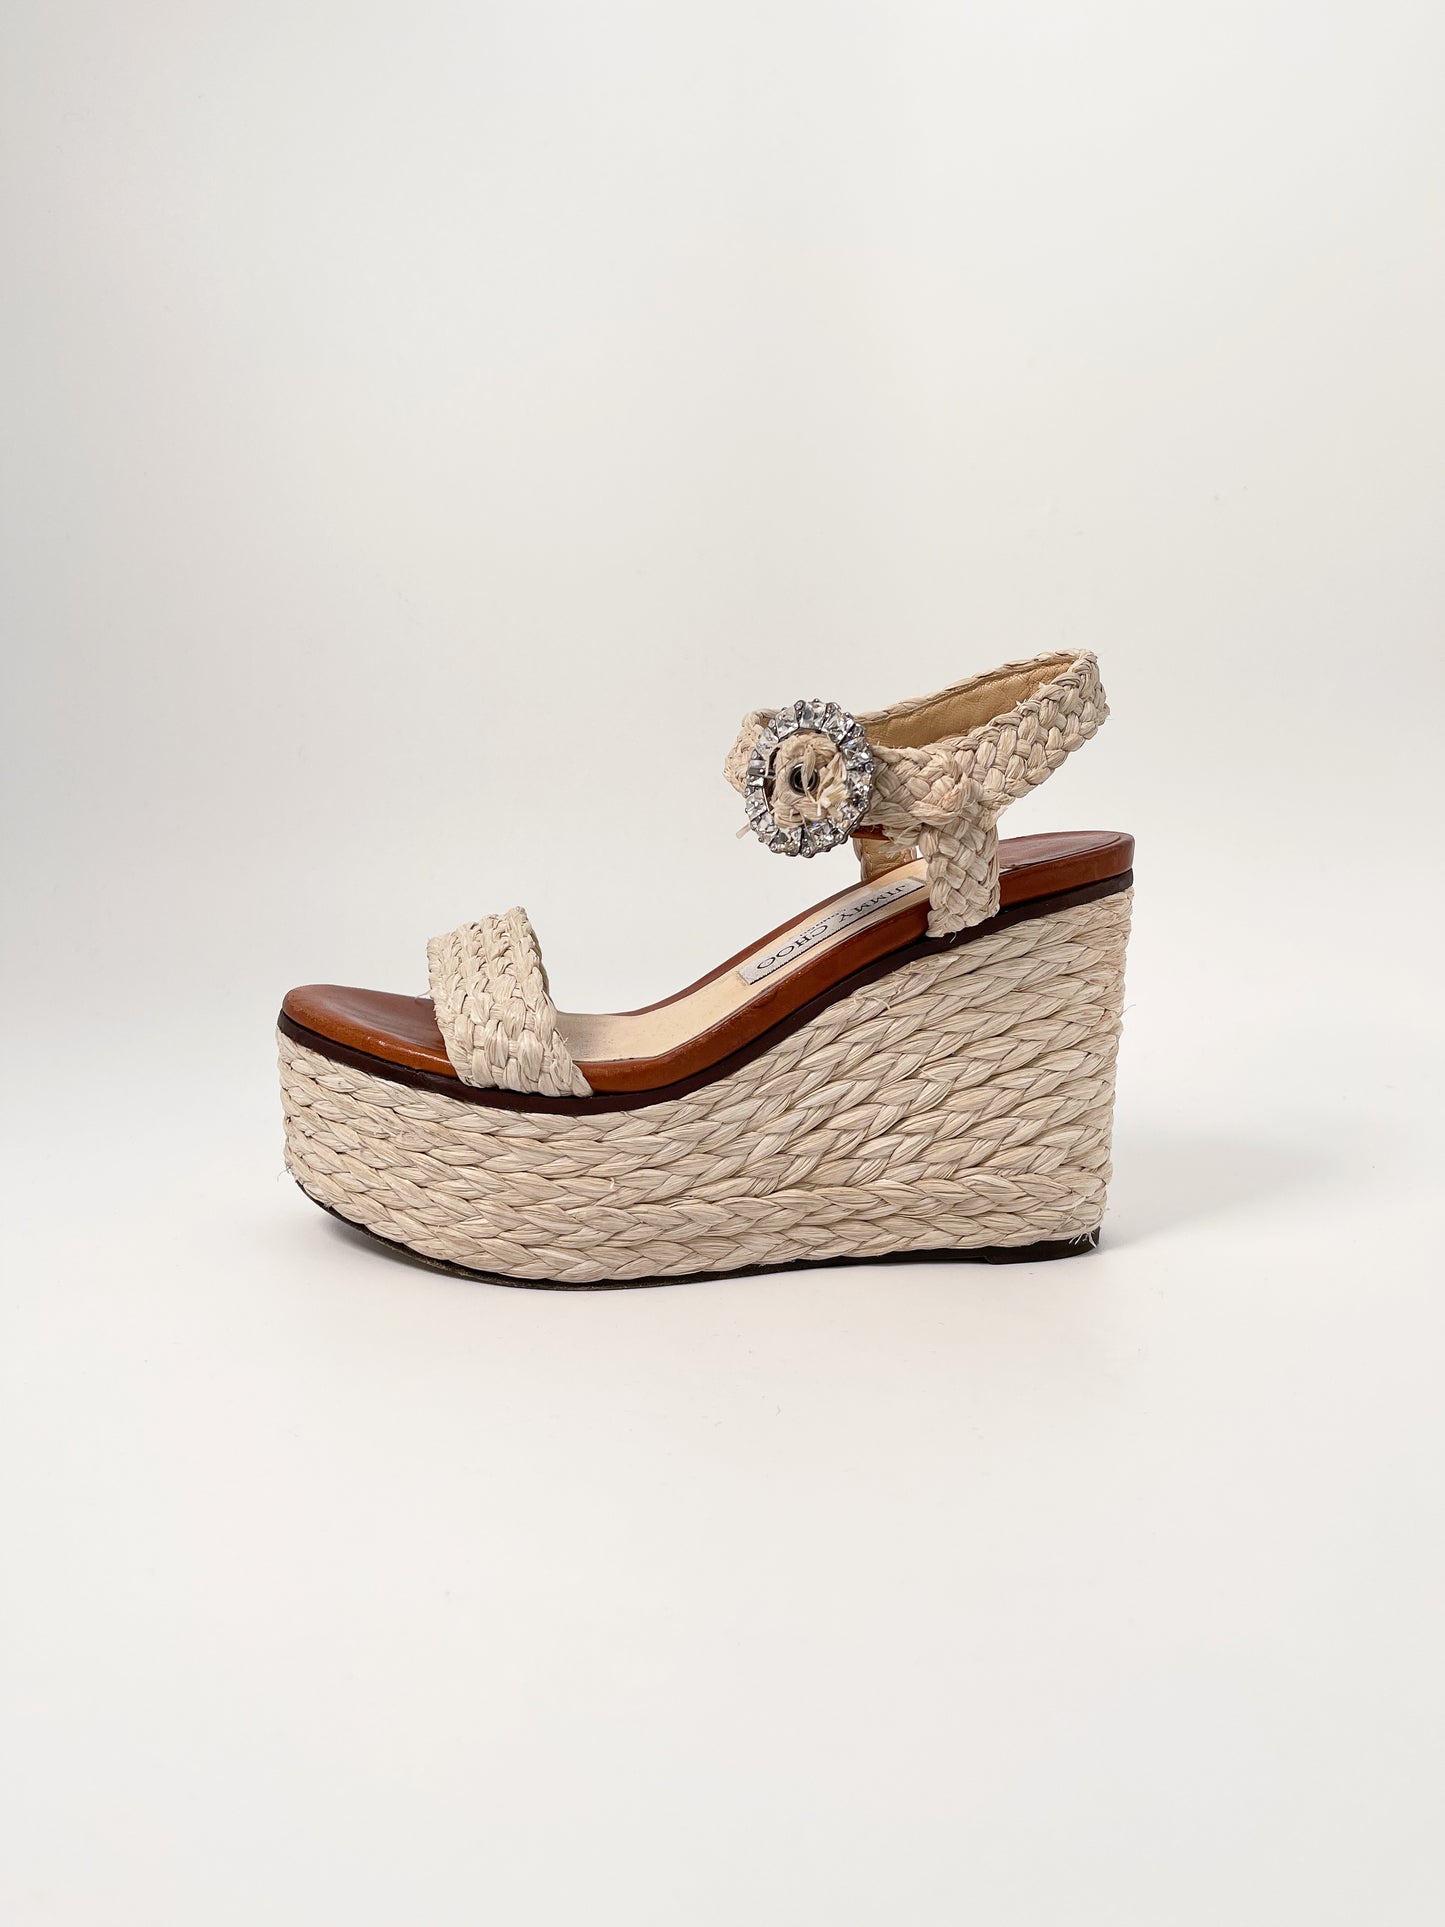 Jimmy Choo Mirabelle 110mm Wedges (Size 37)